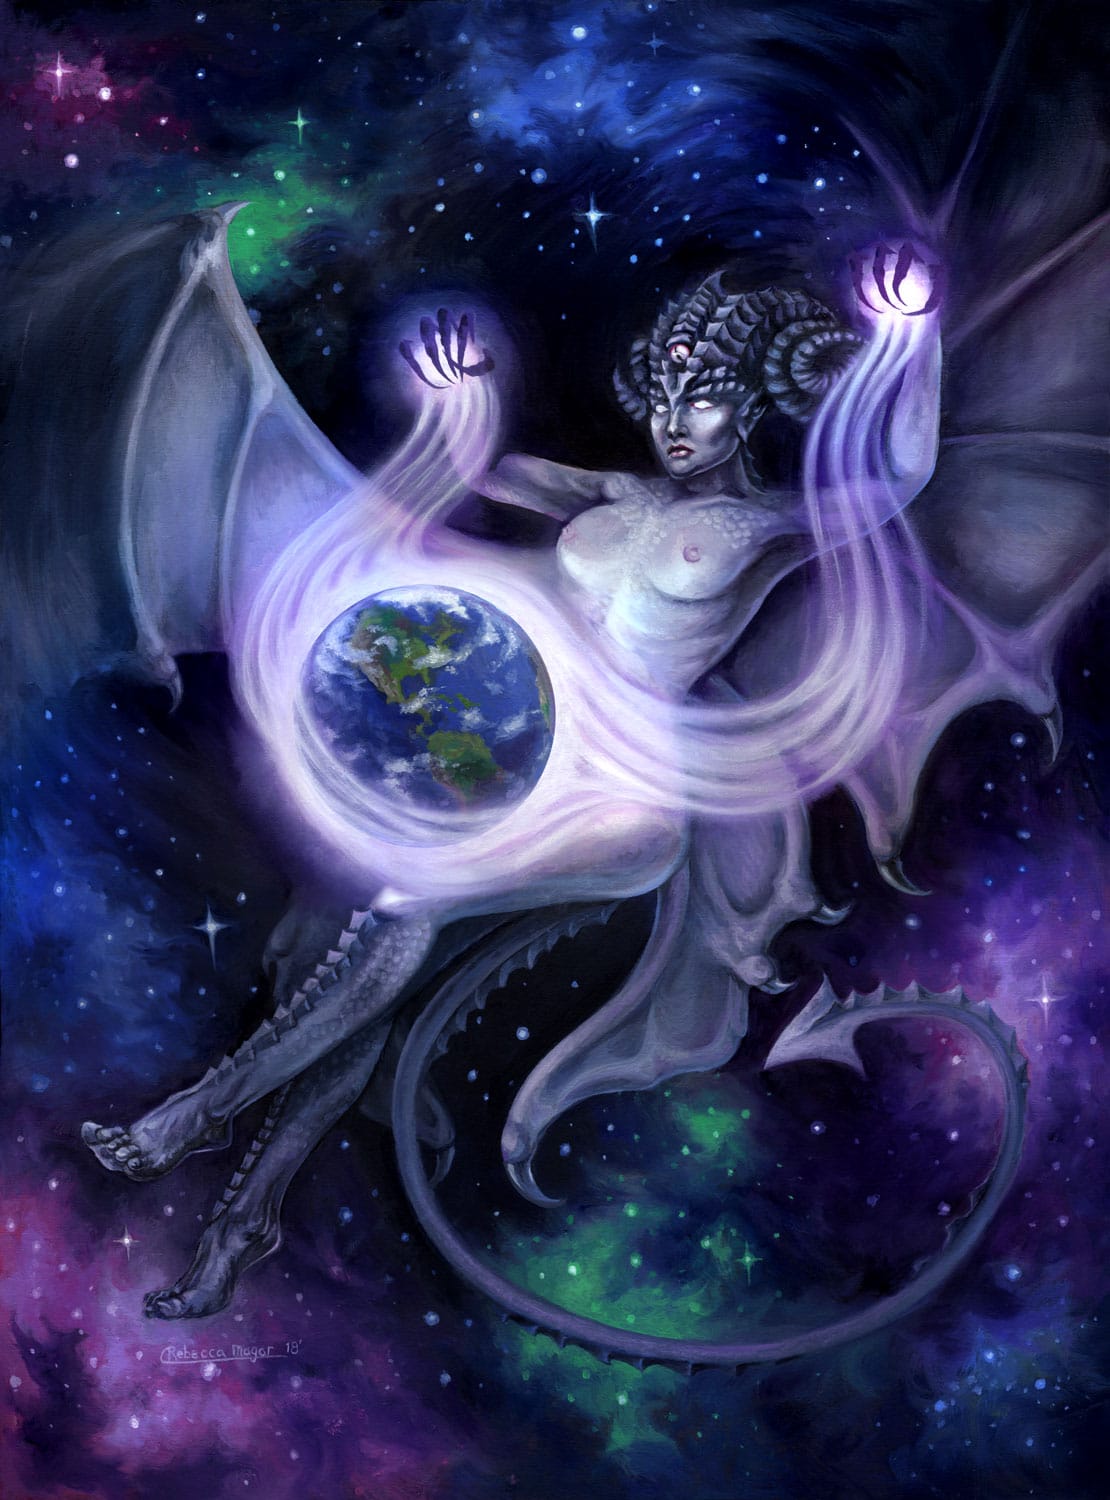 Otherworldly - Painting of a Succubus Space Faerie Casting a Spell on Earth by Rebecca Magar